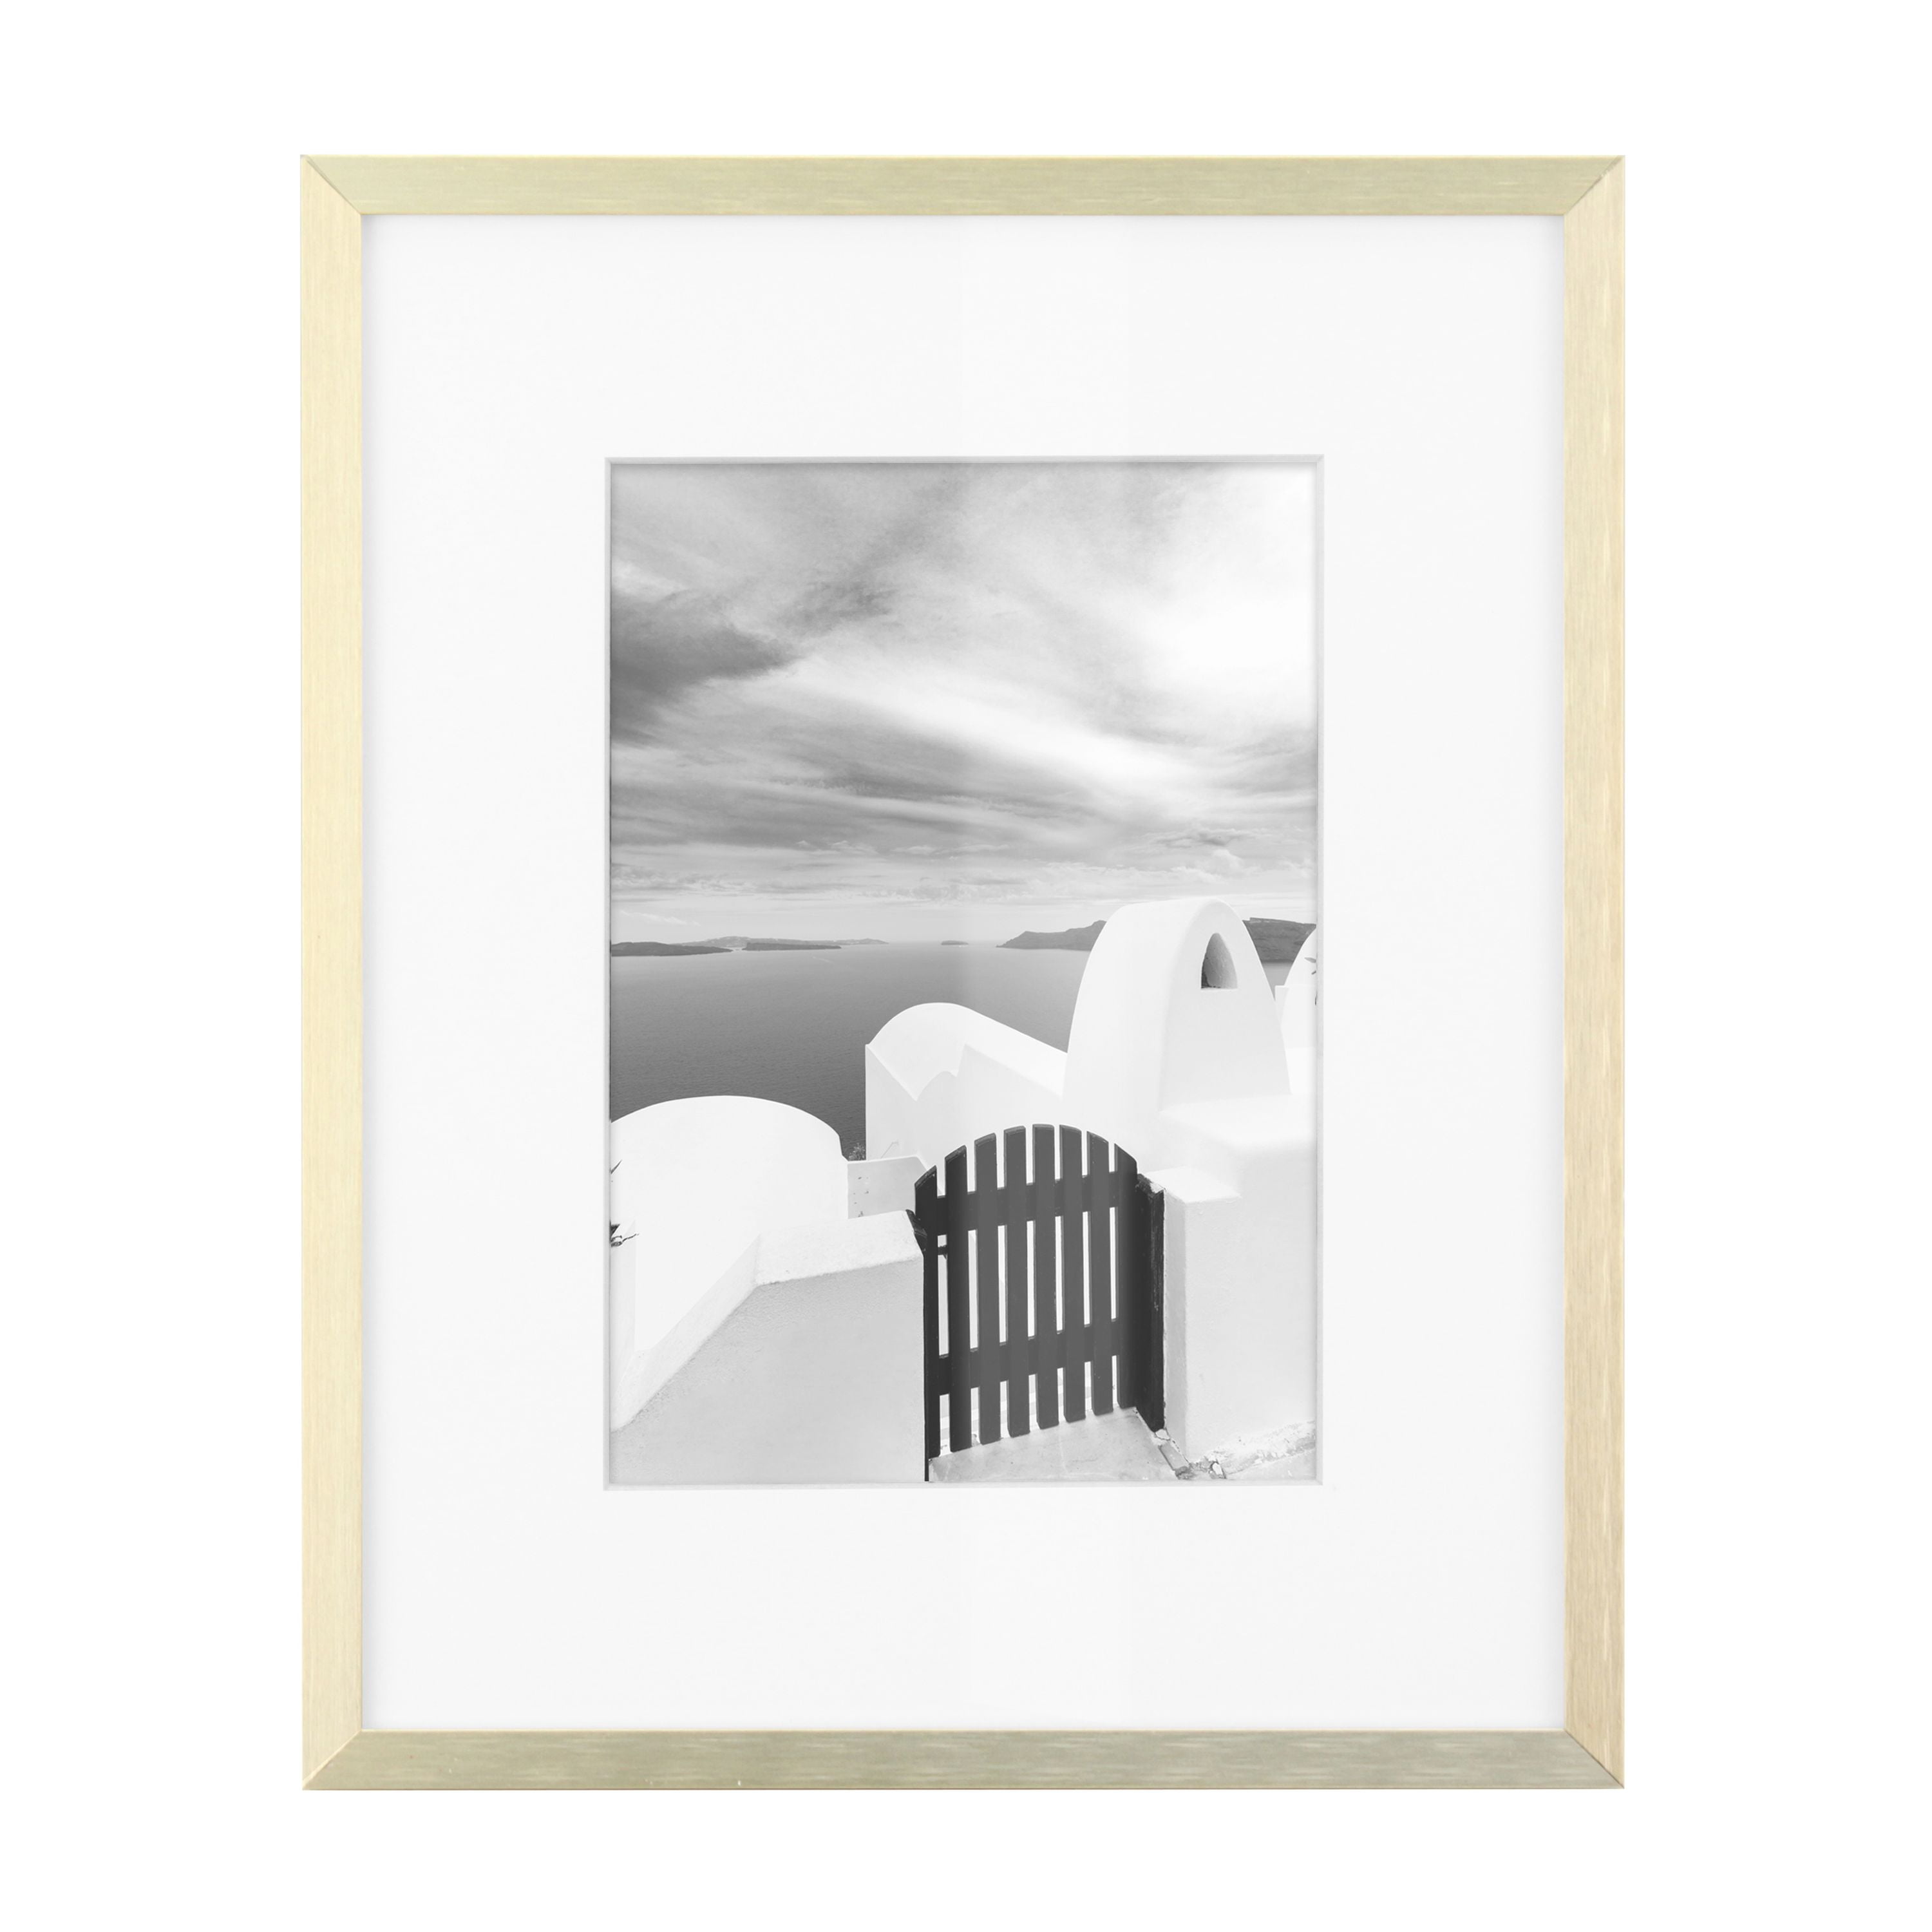 Better Homes & Gardens 8x10 Matted to 5x7 Metal Gallery Tabletop Picture Frame, Gold